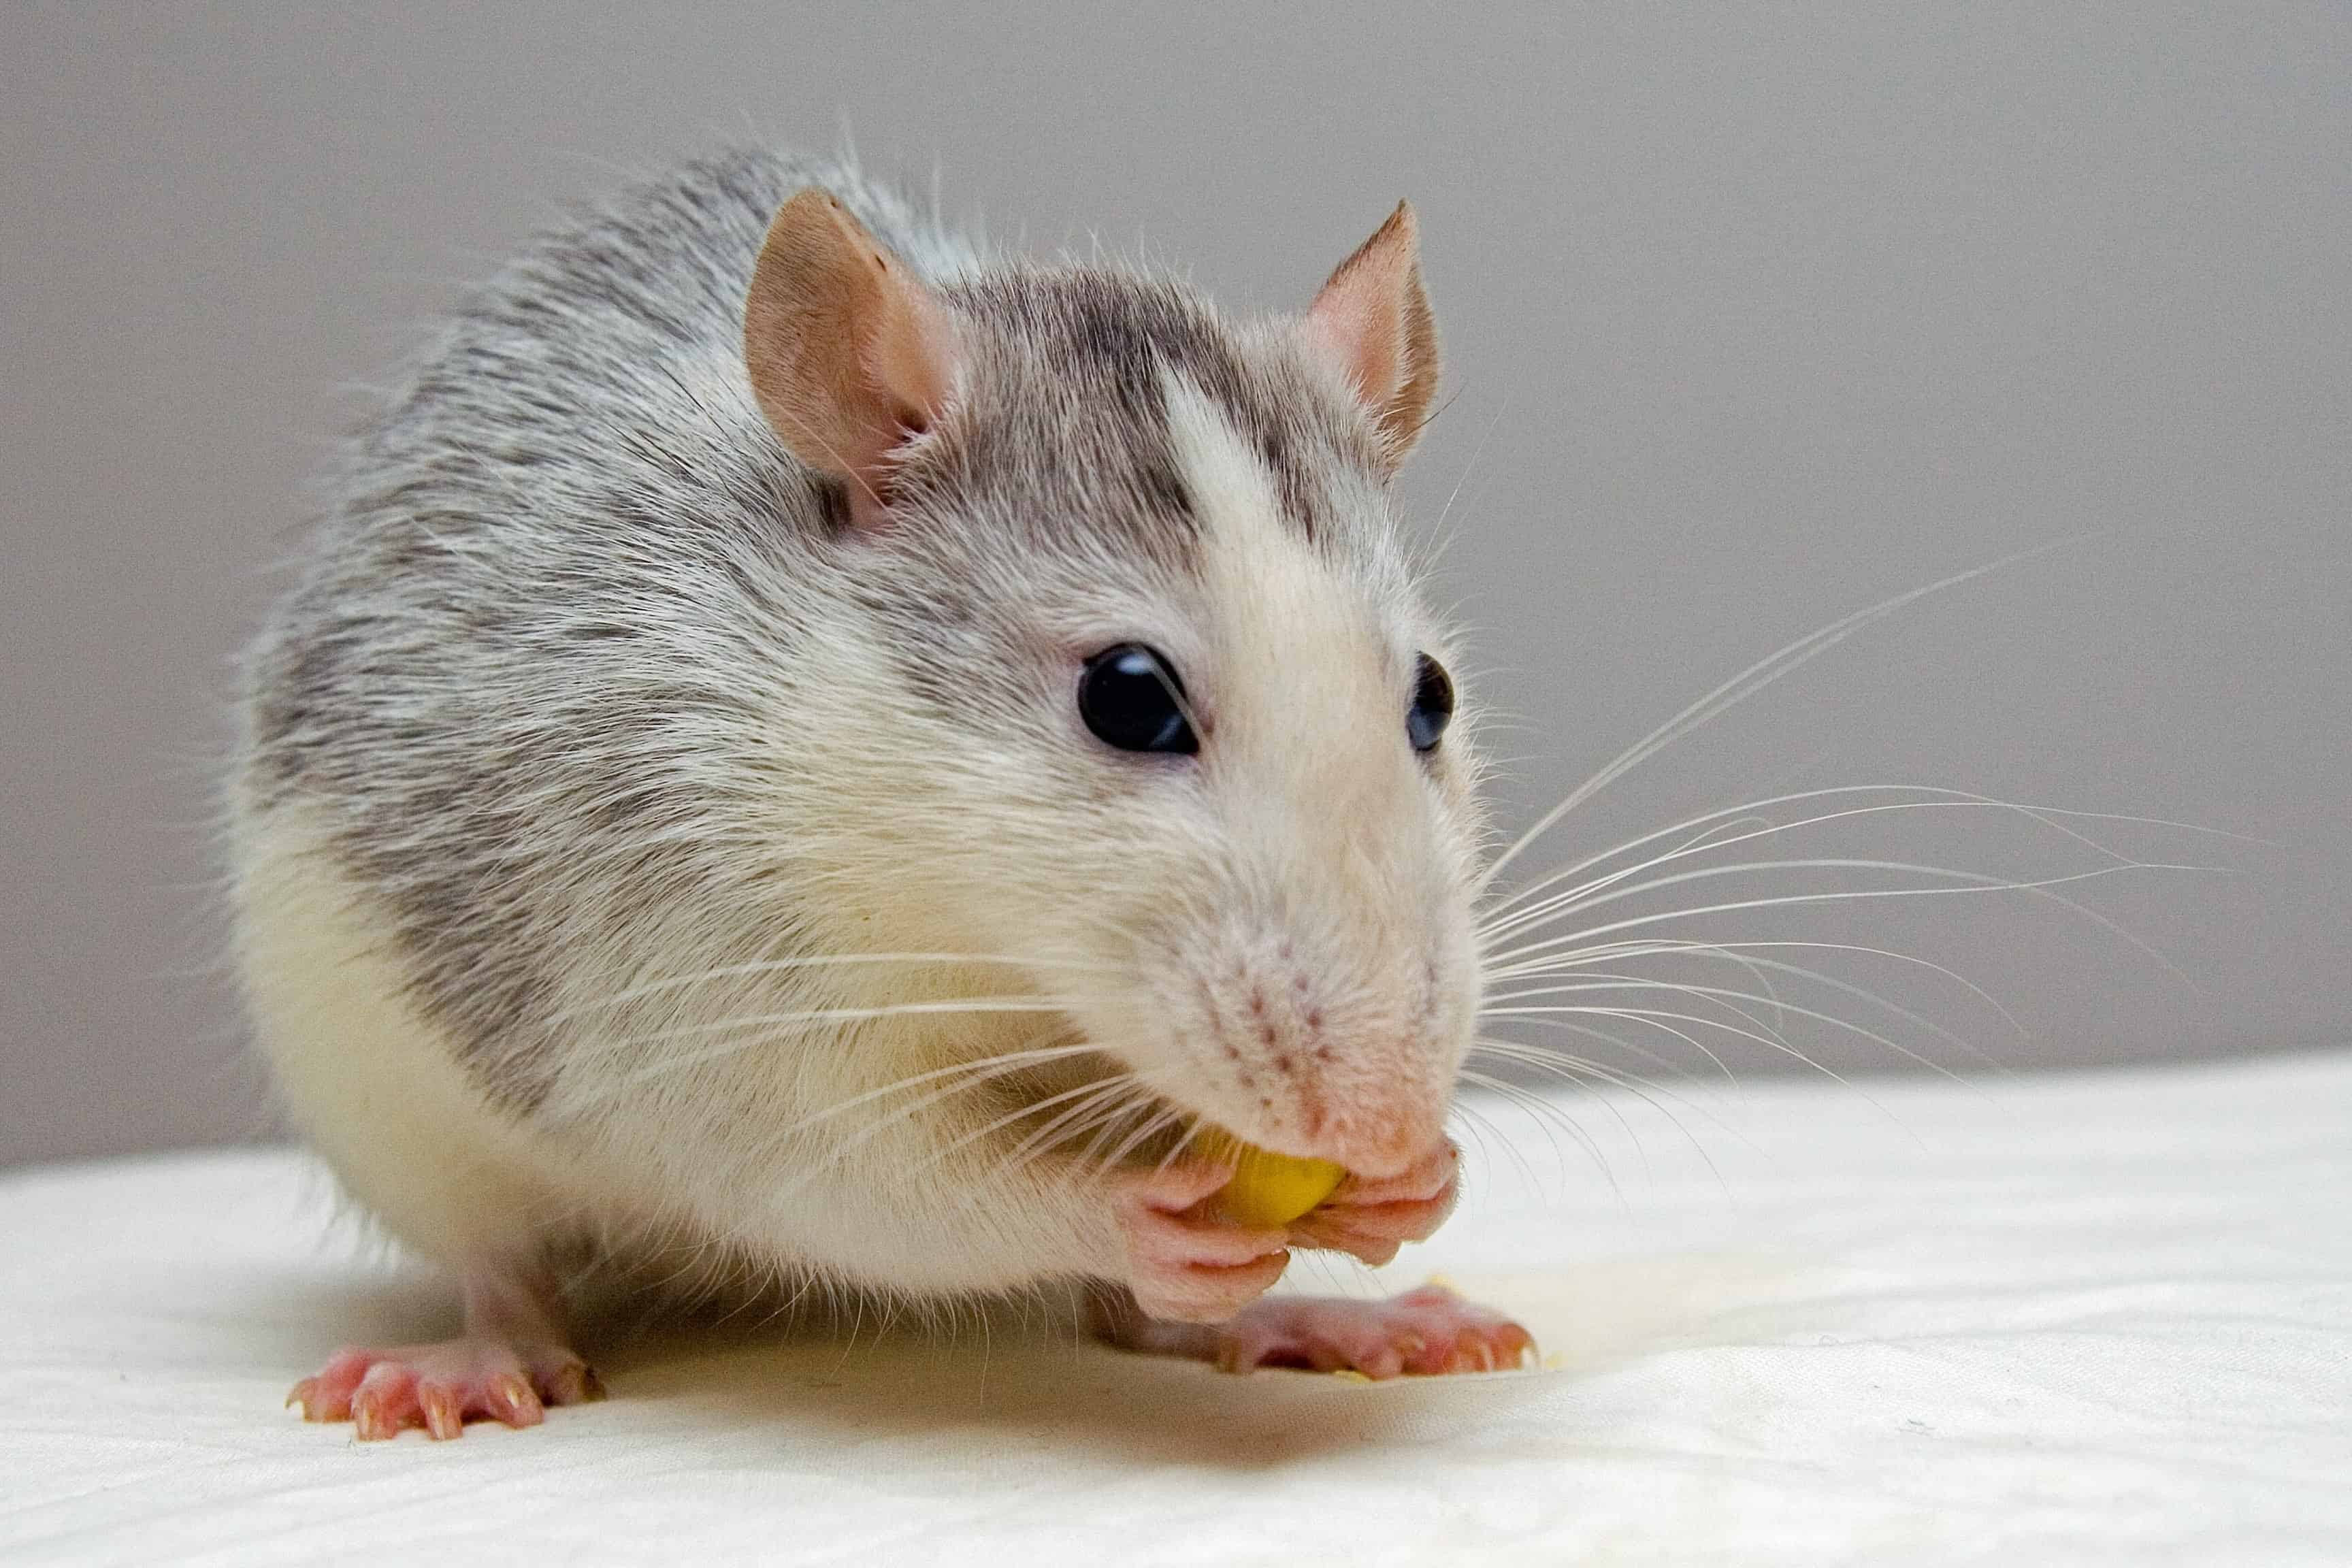 Brampton residents can now get financial help with rodent infestations